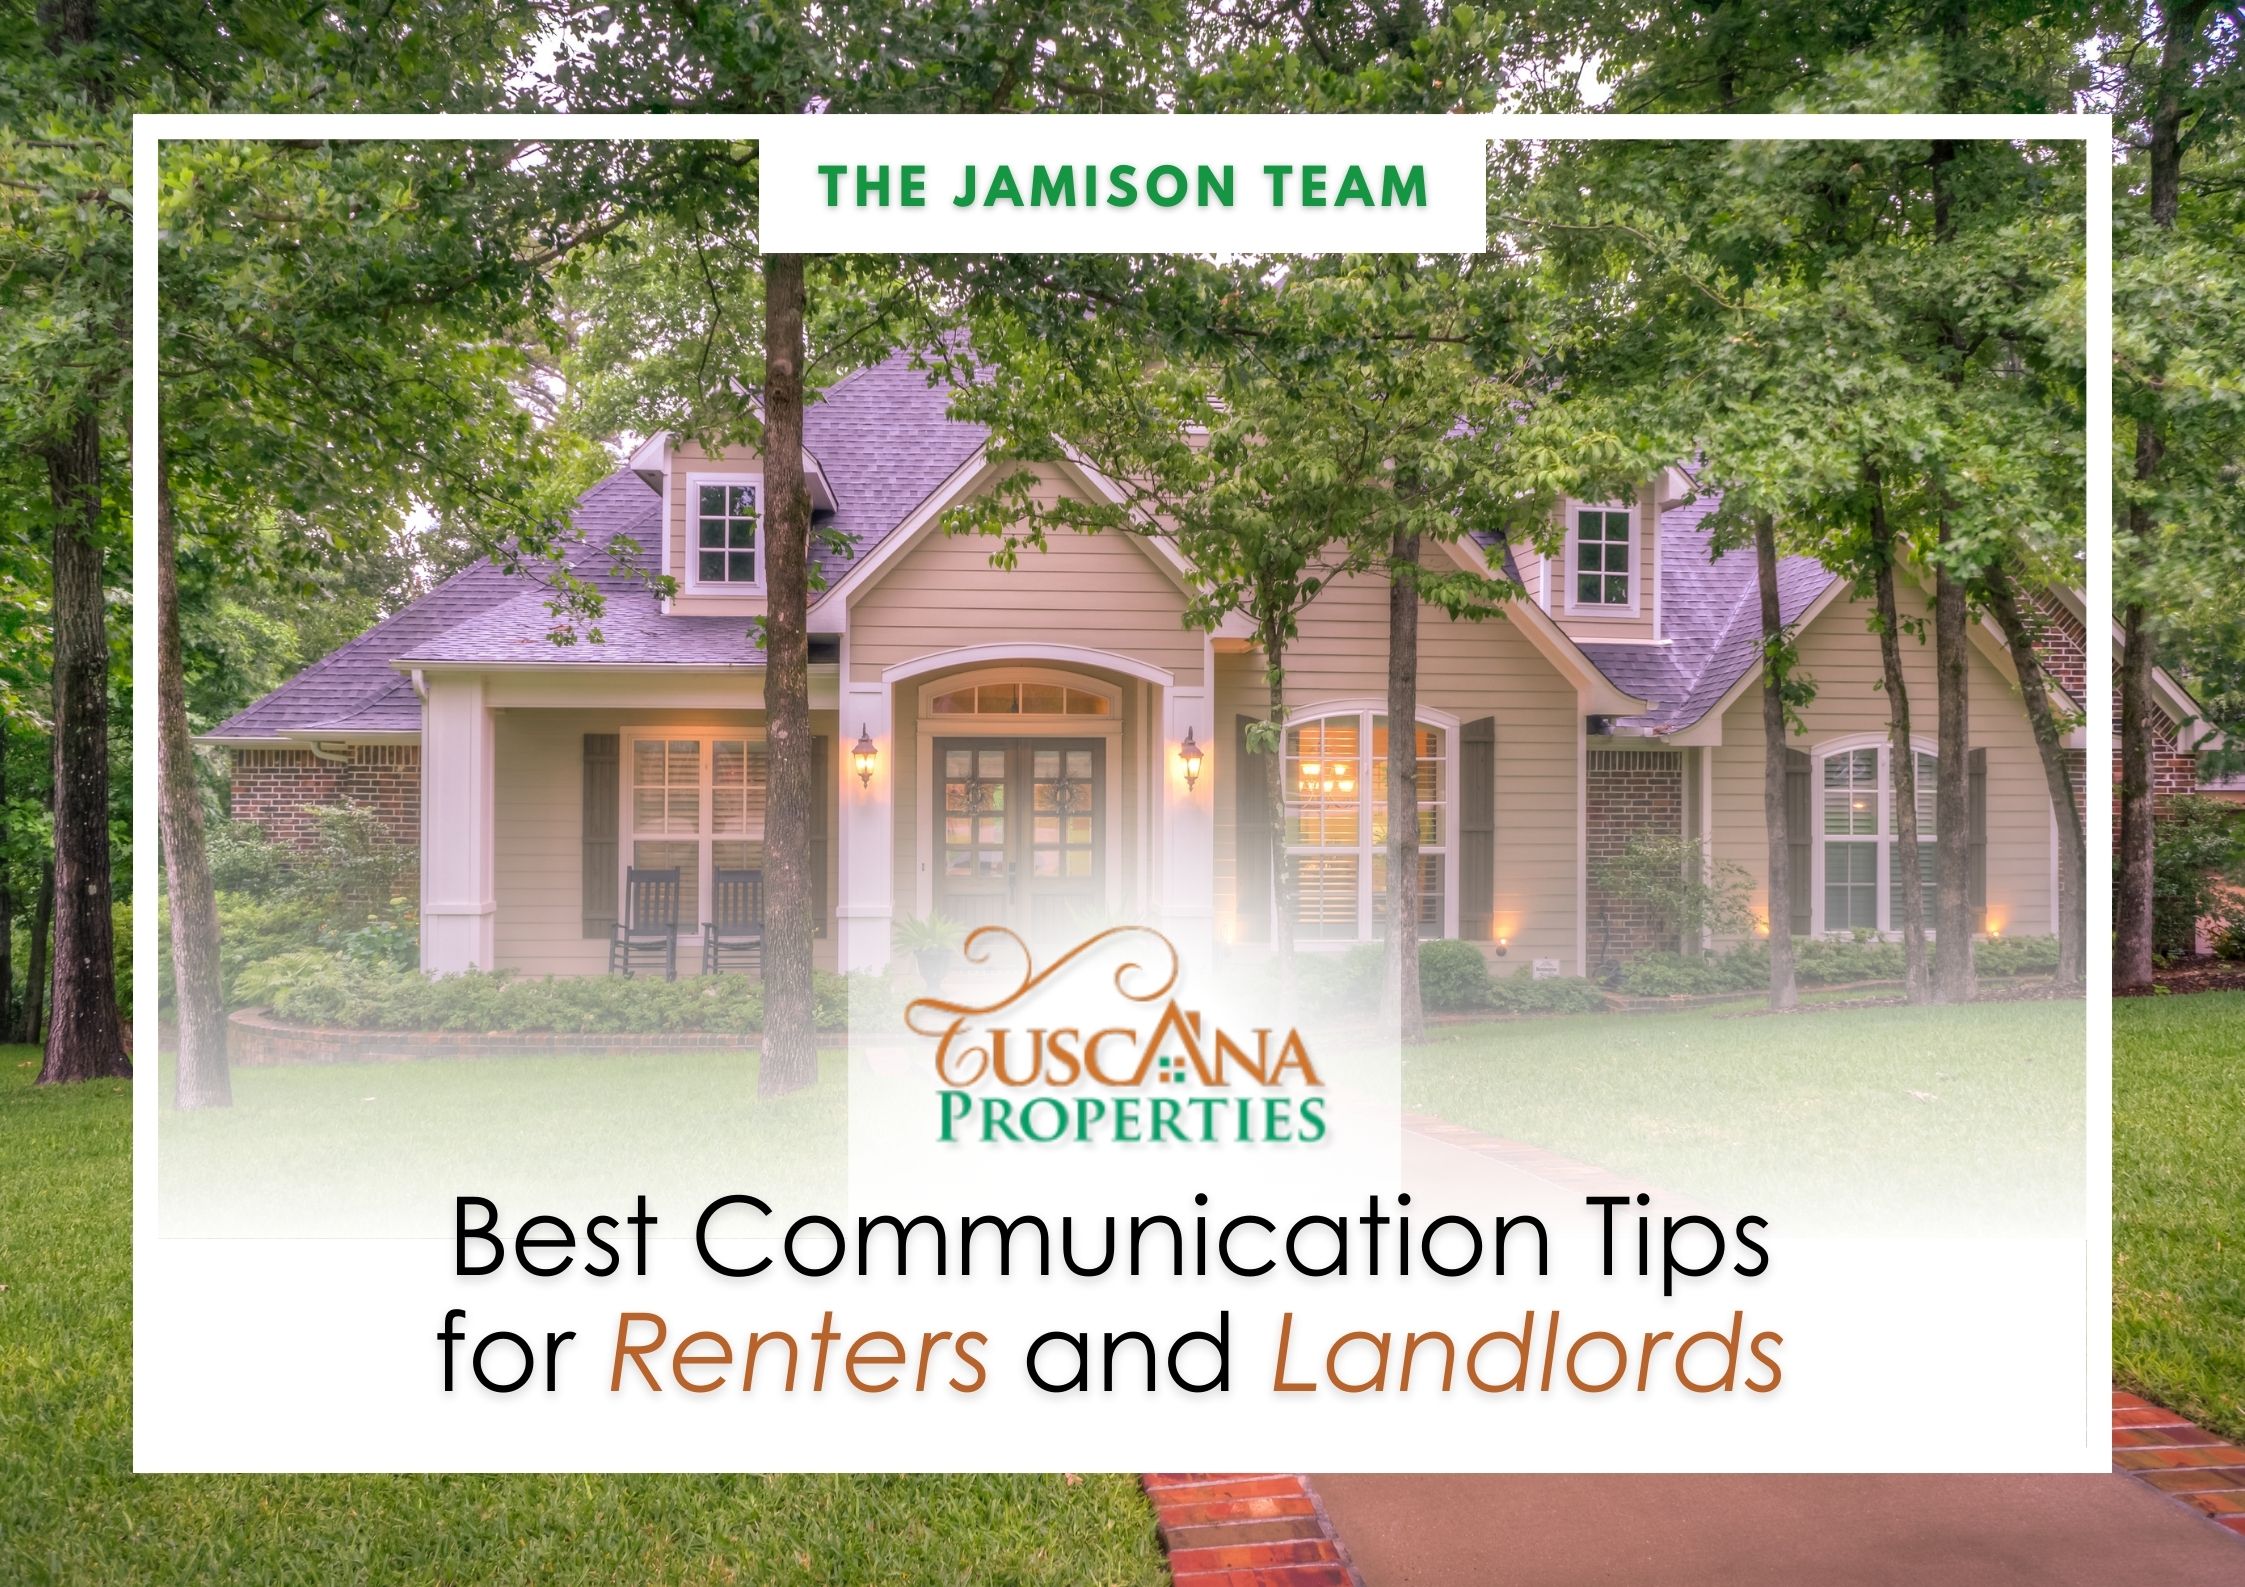 Best communication tips for renters and landlords